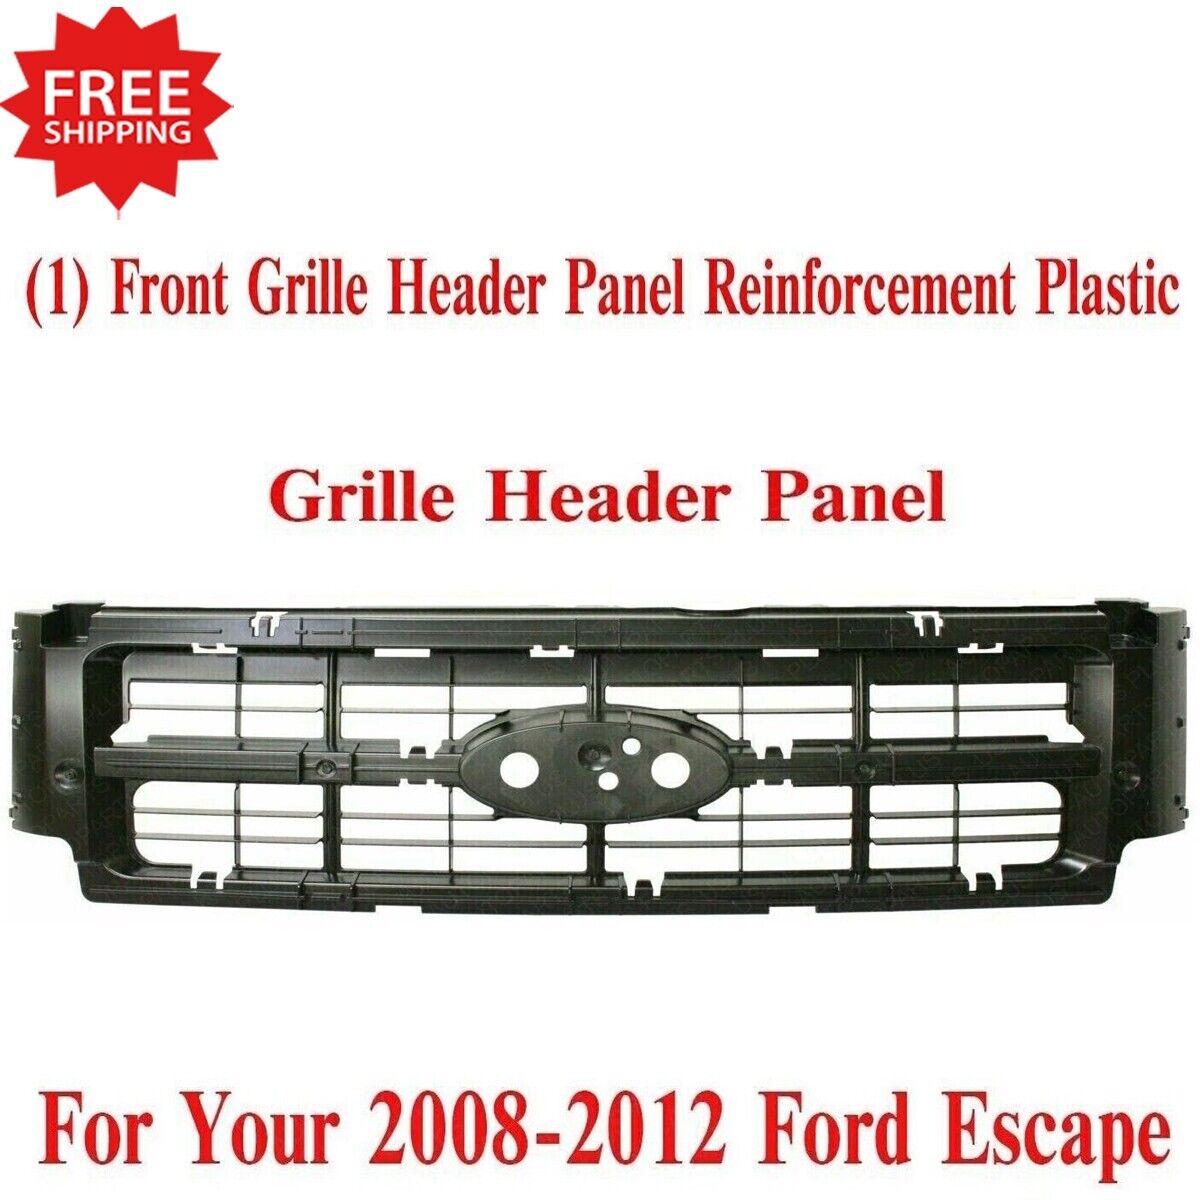 New Front Grille Header Panel Reinforcement Plastic For 2008-2012 Ford Escape